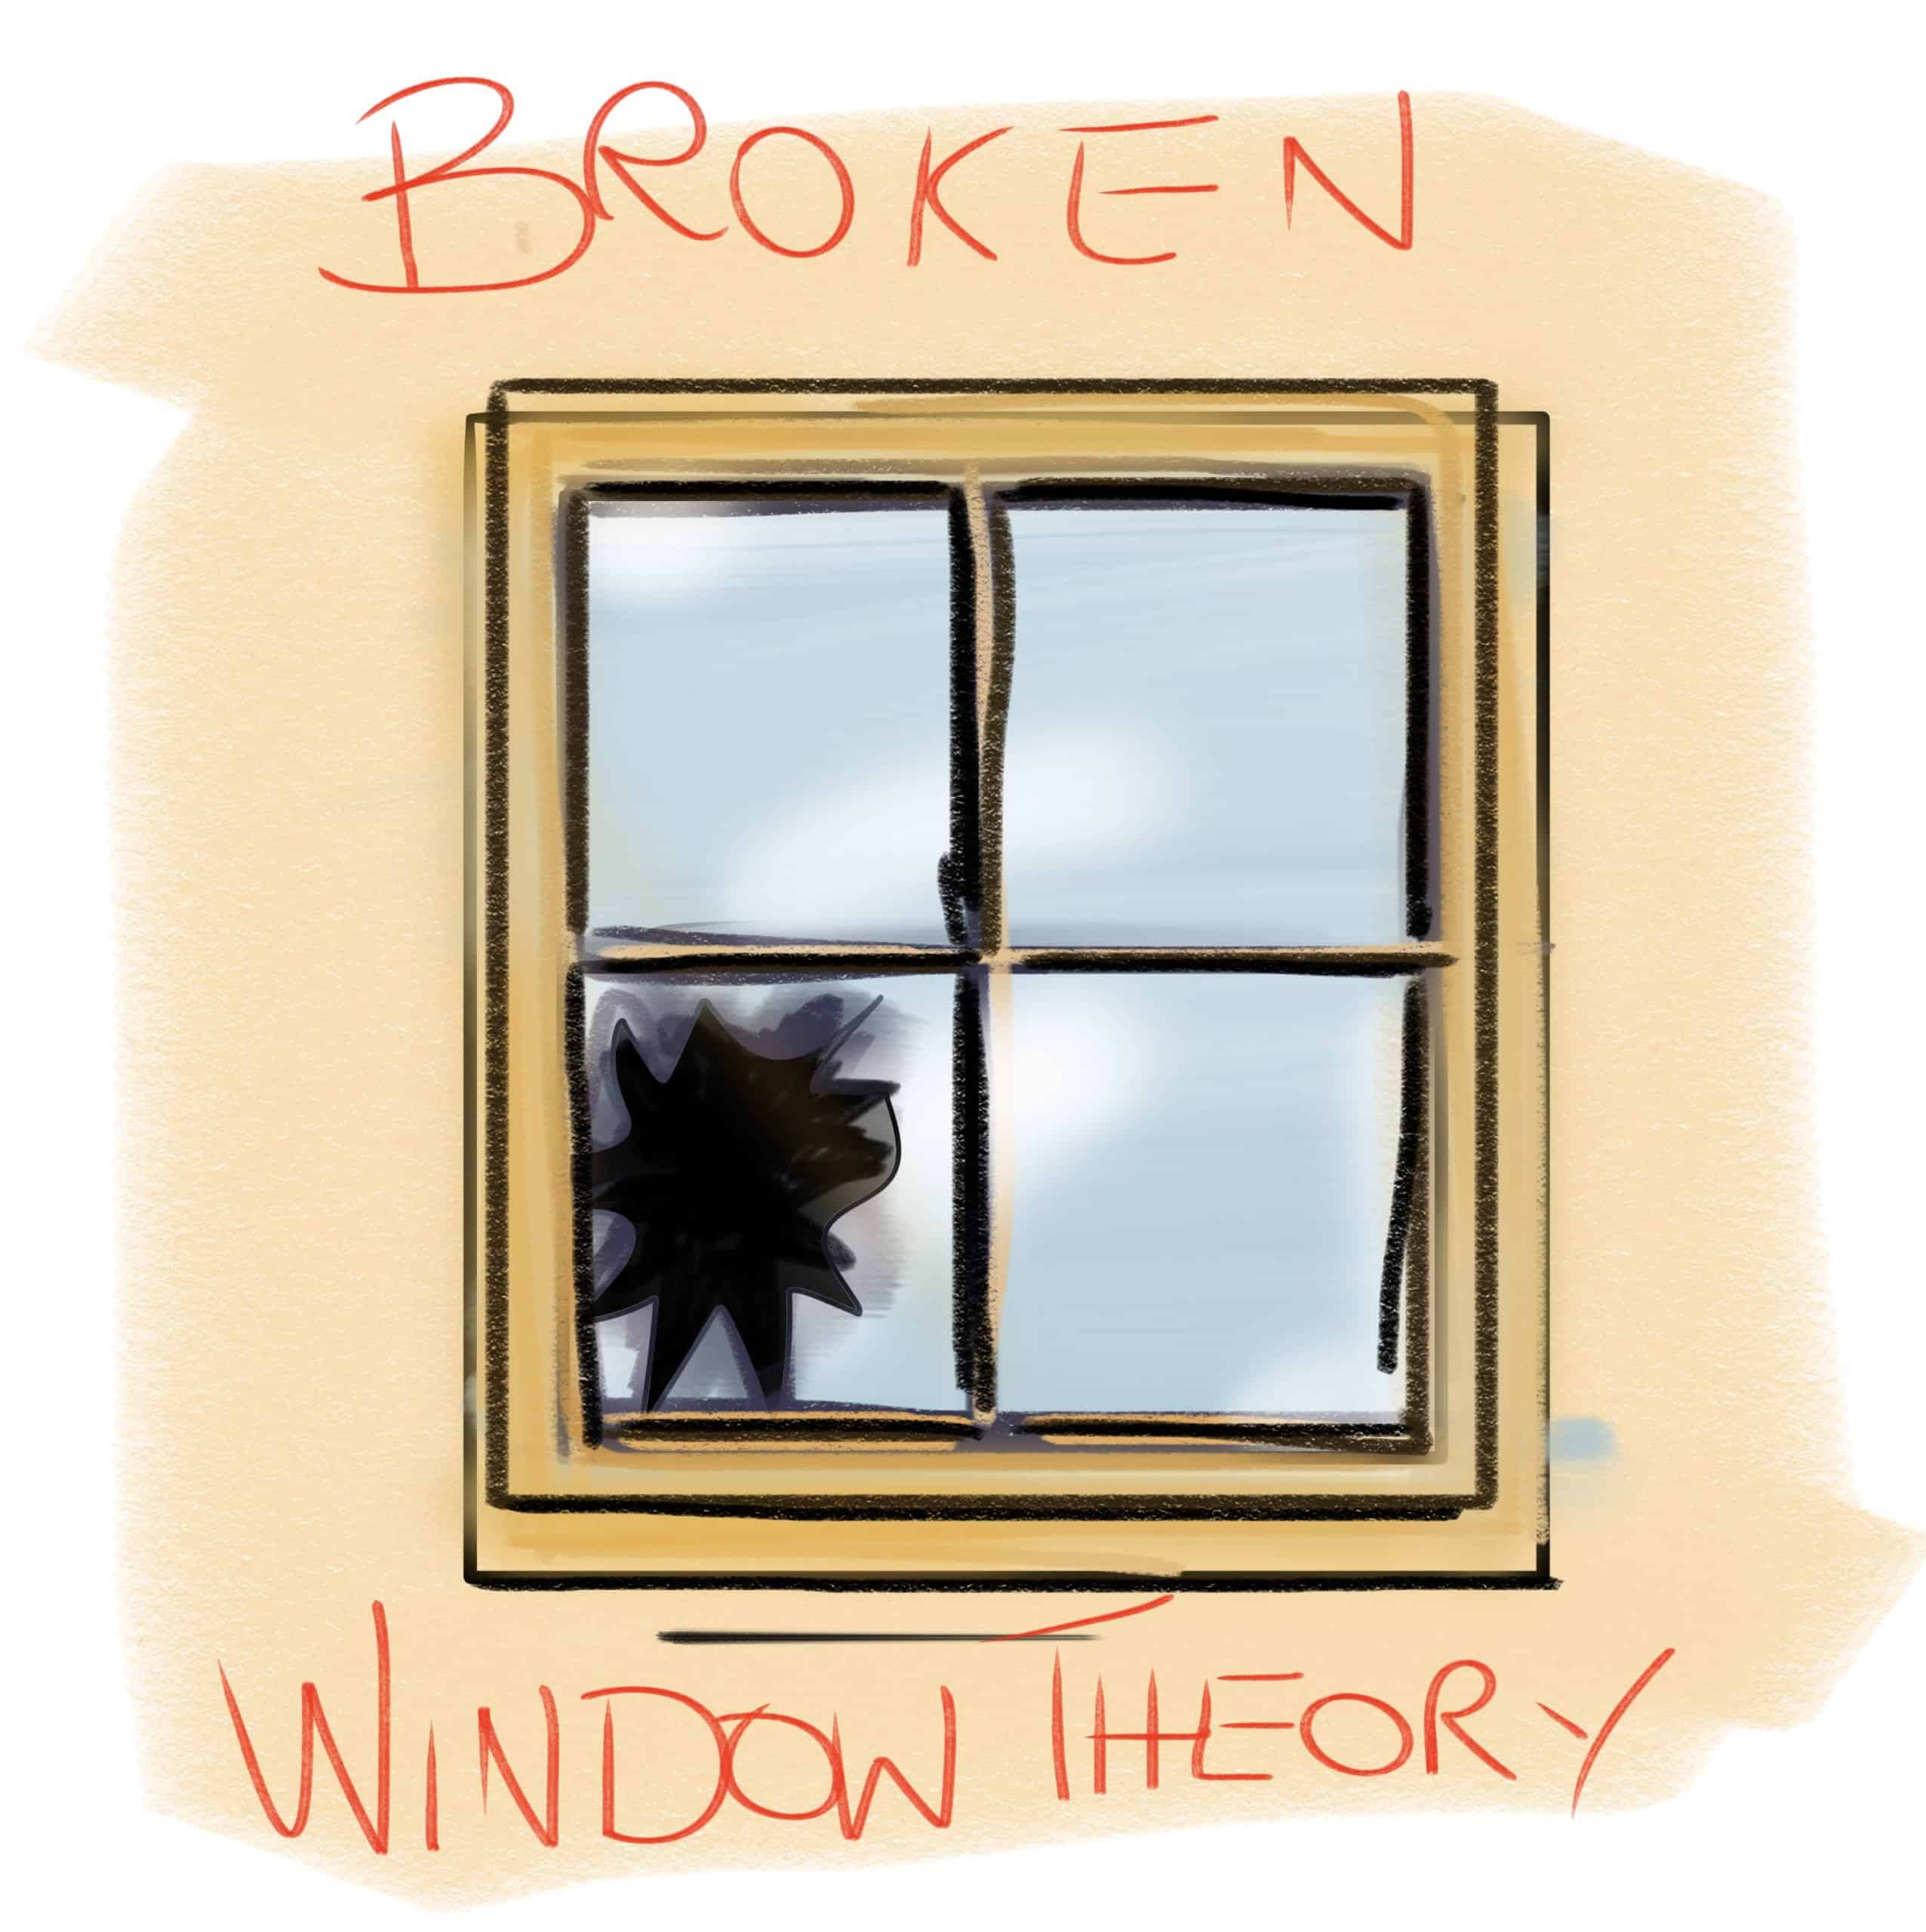 broken window theory pros and cons